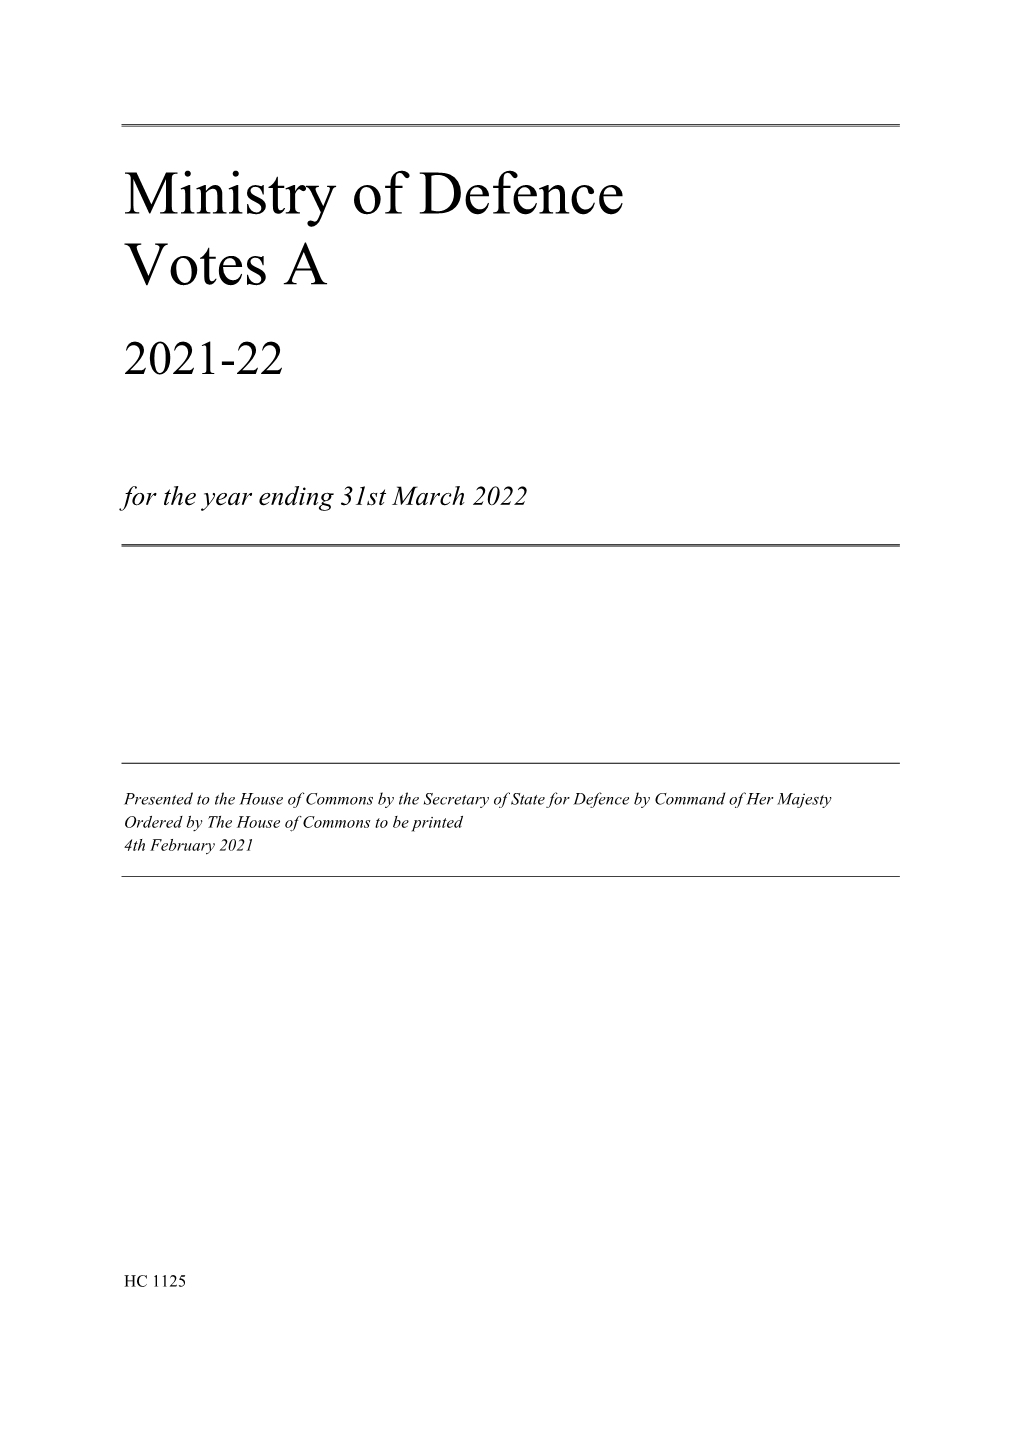 Ministry of Defence Votes A: 2020 to 2021 (Print-Ready Version)